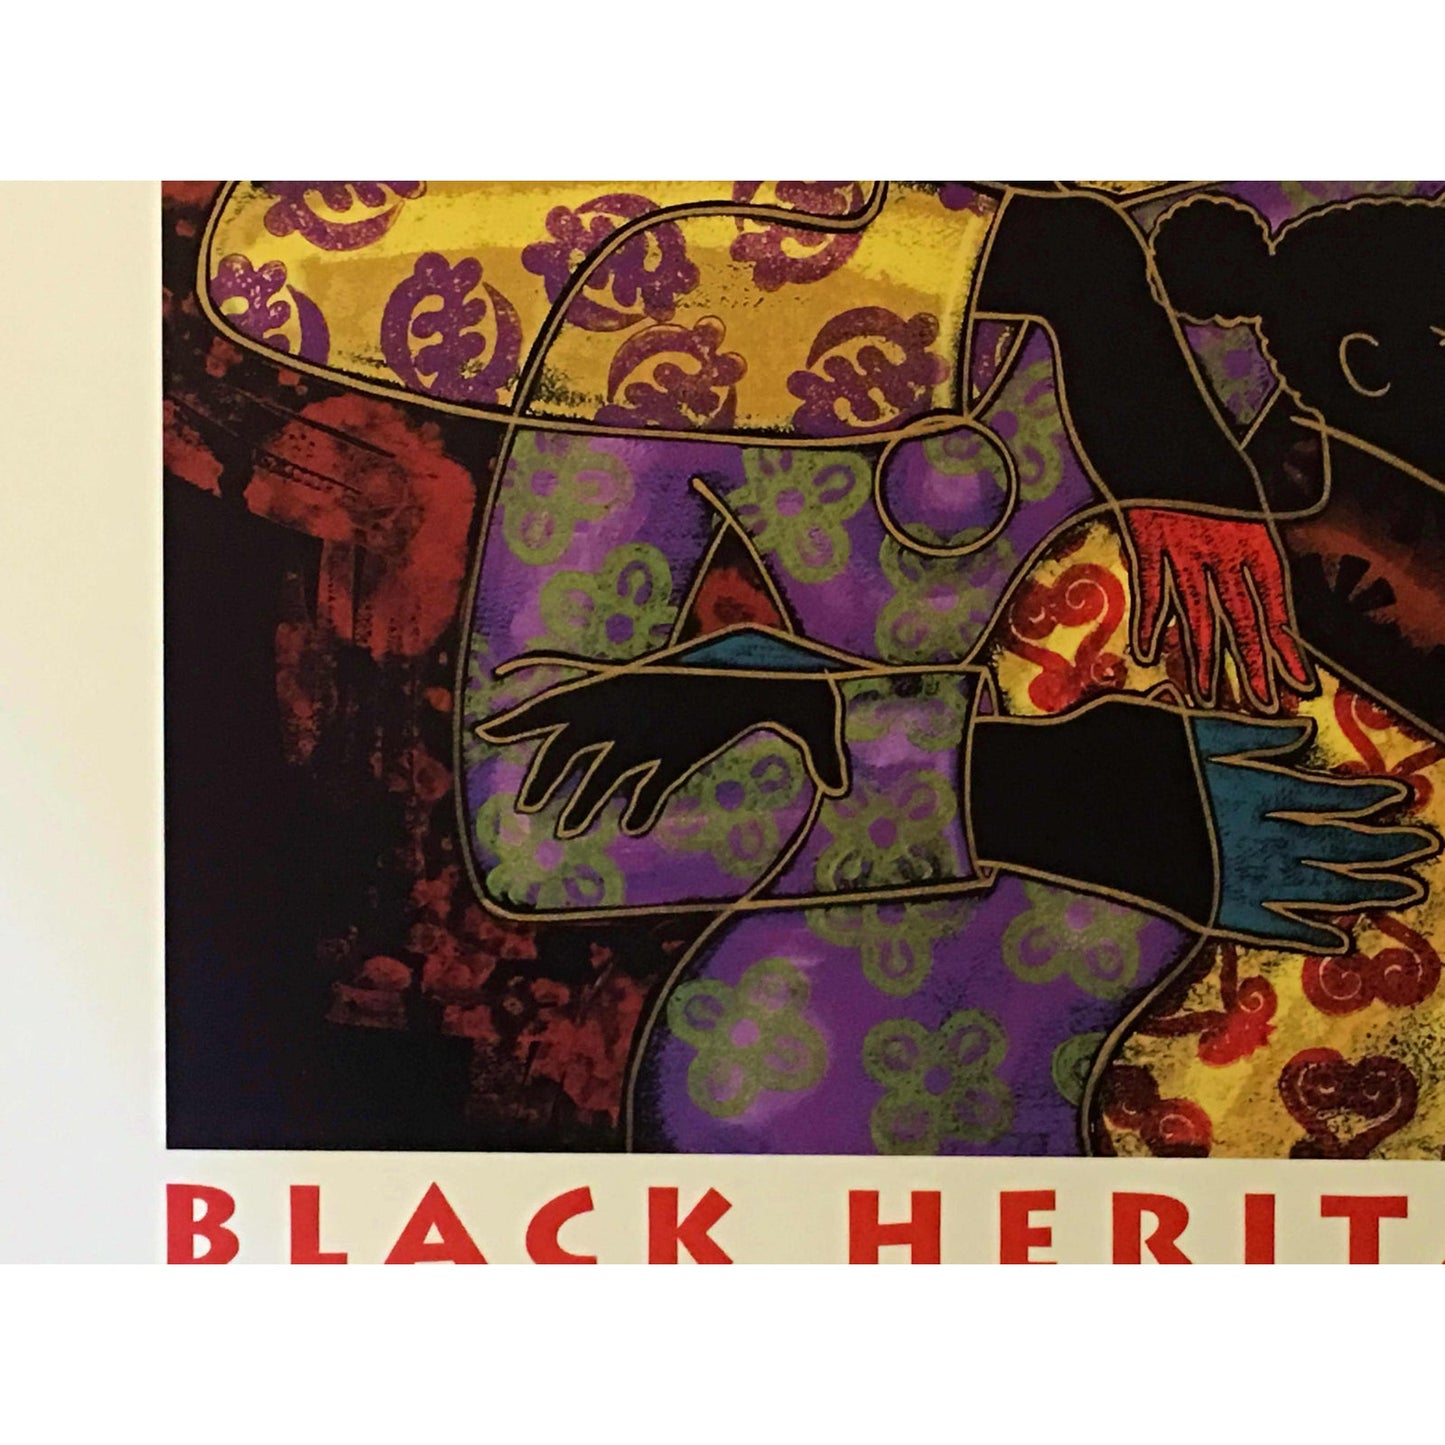 Contemporary Print of Black Heritage Expo by Larry Poncho Brown